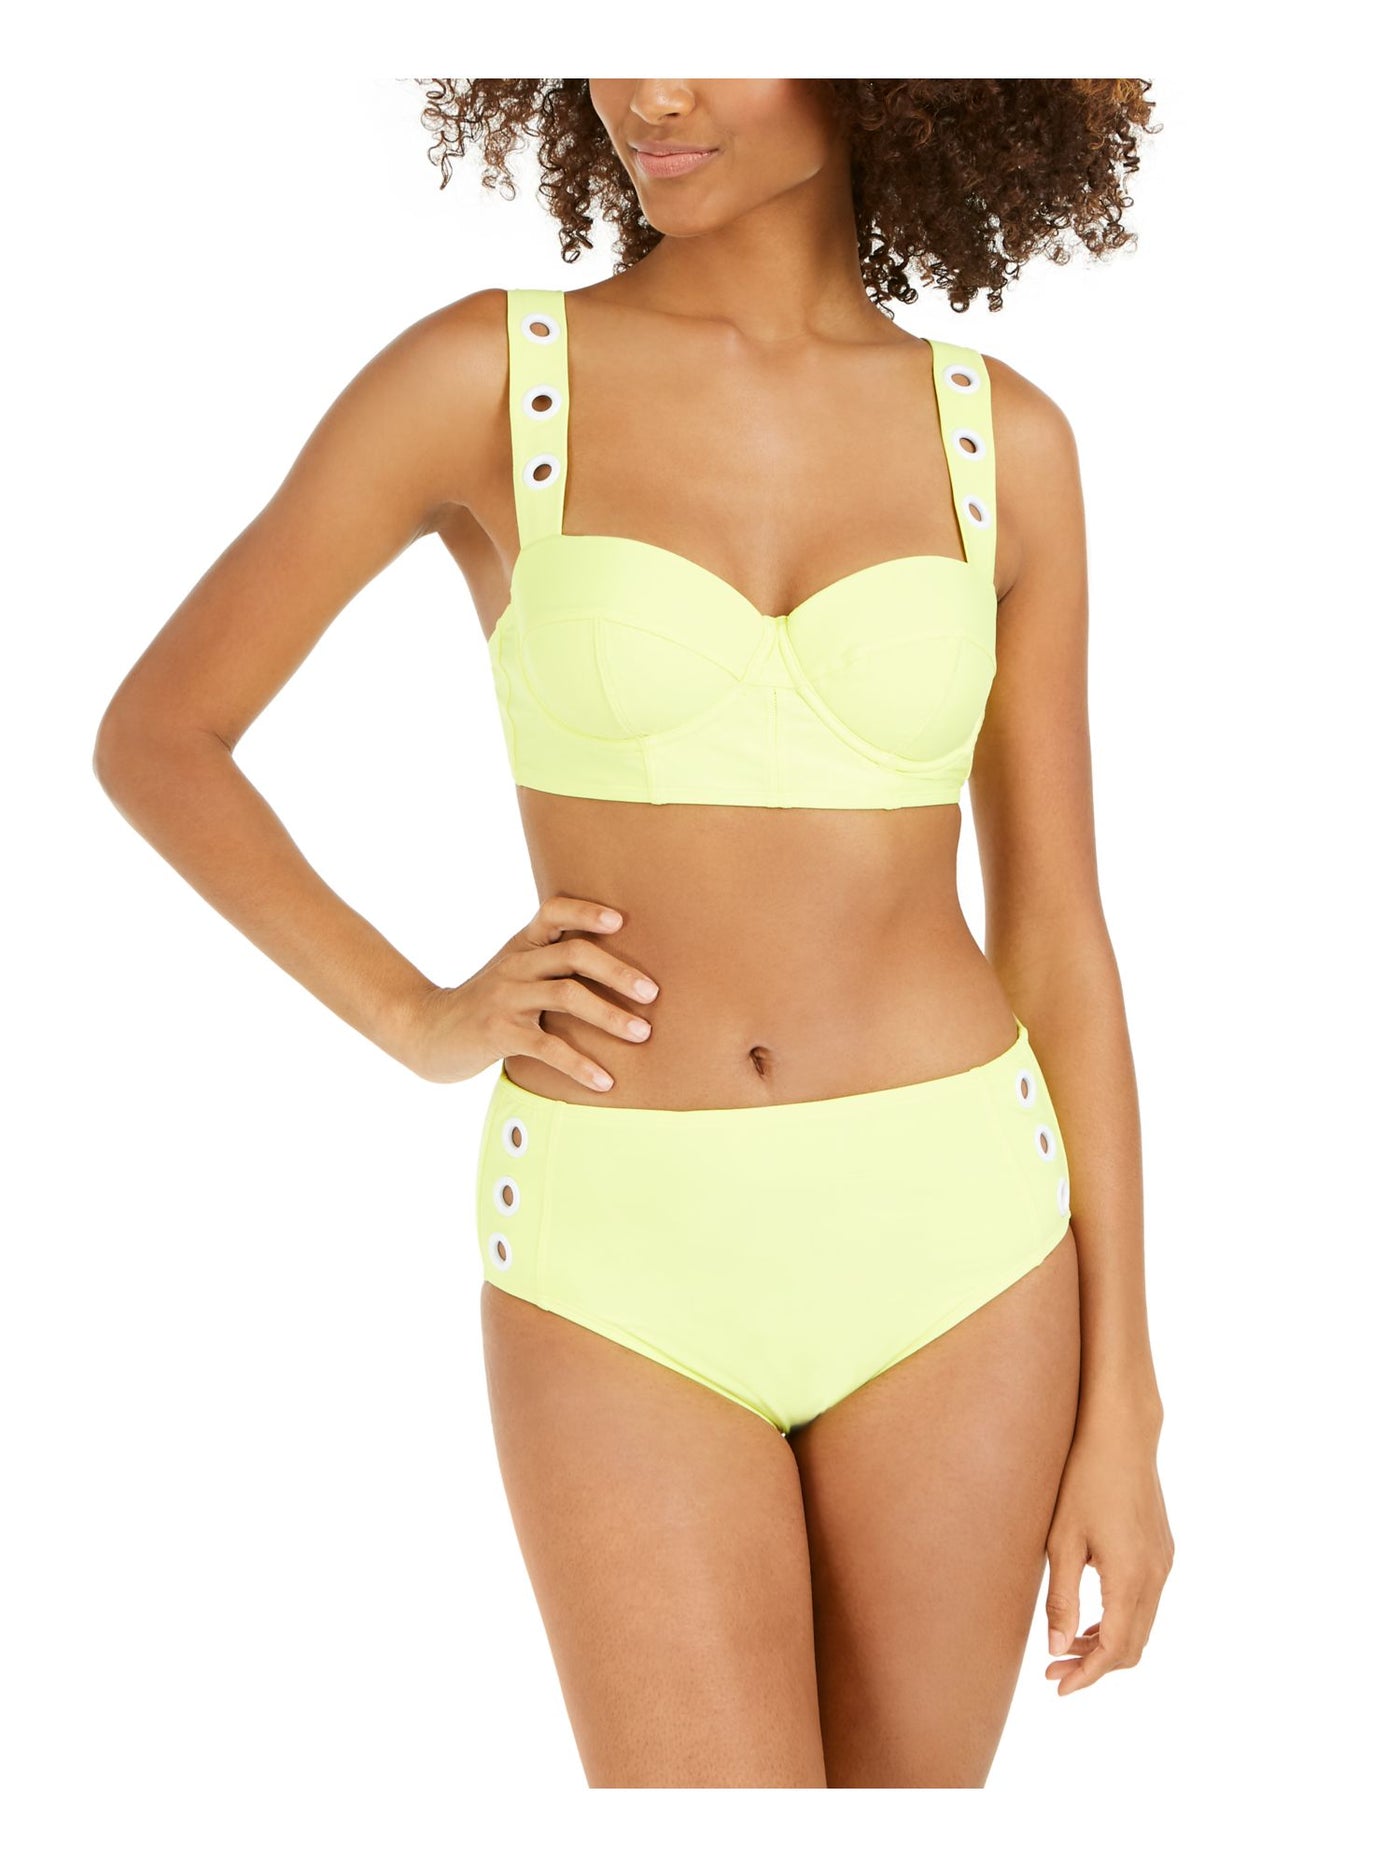 DKNY Women's Yellow Stretch Fixed Cups Adjustable Swimsuit Top XS